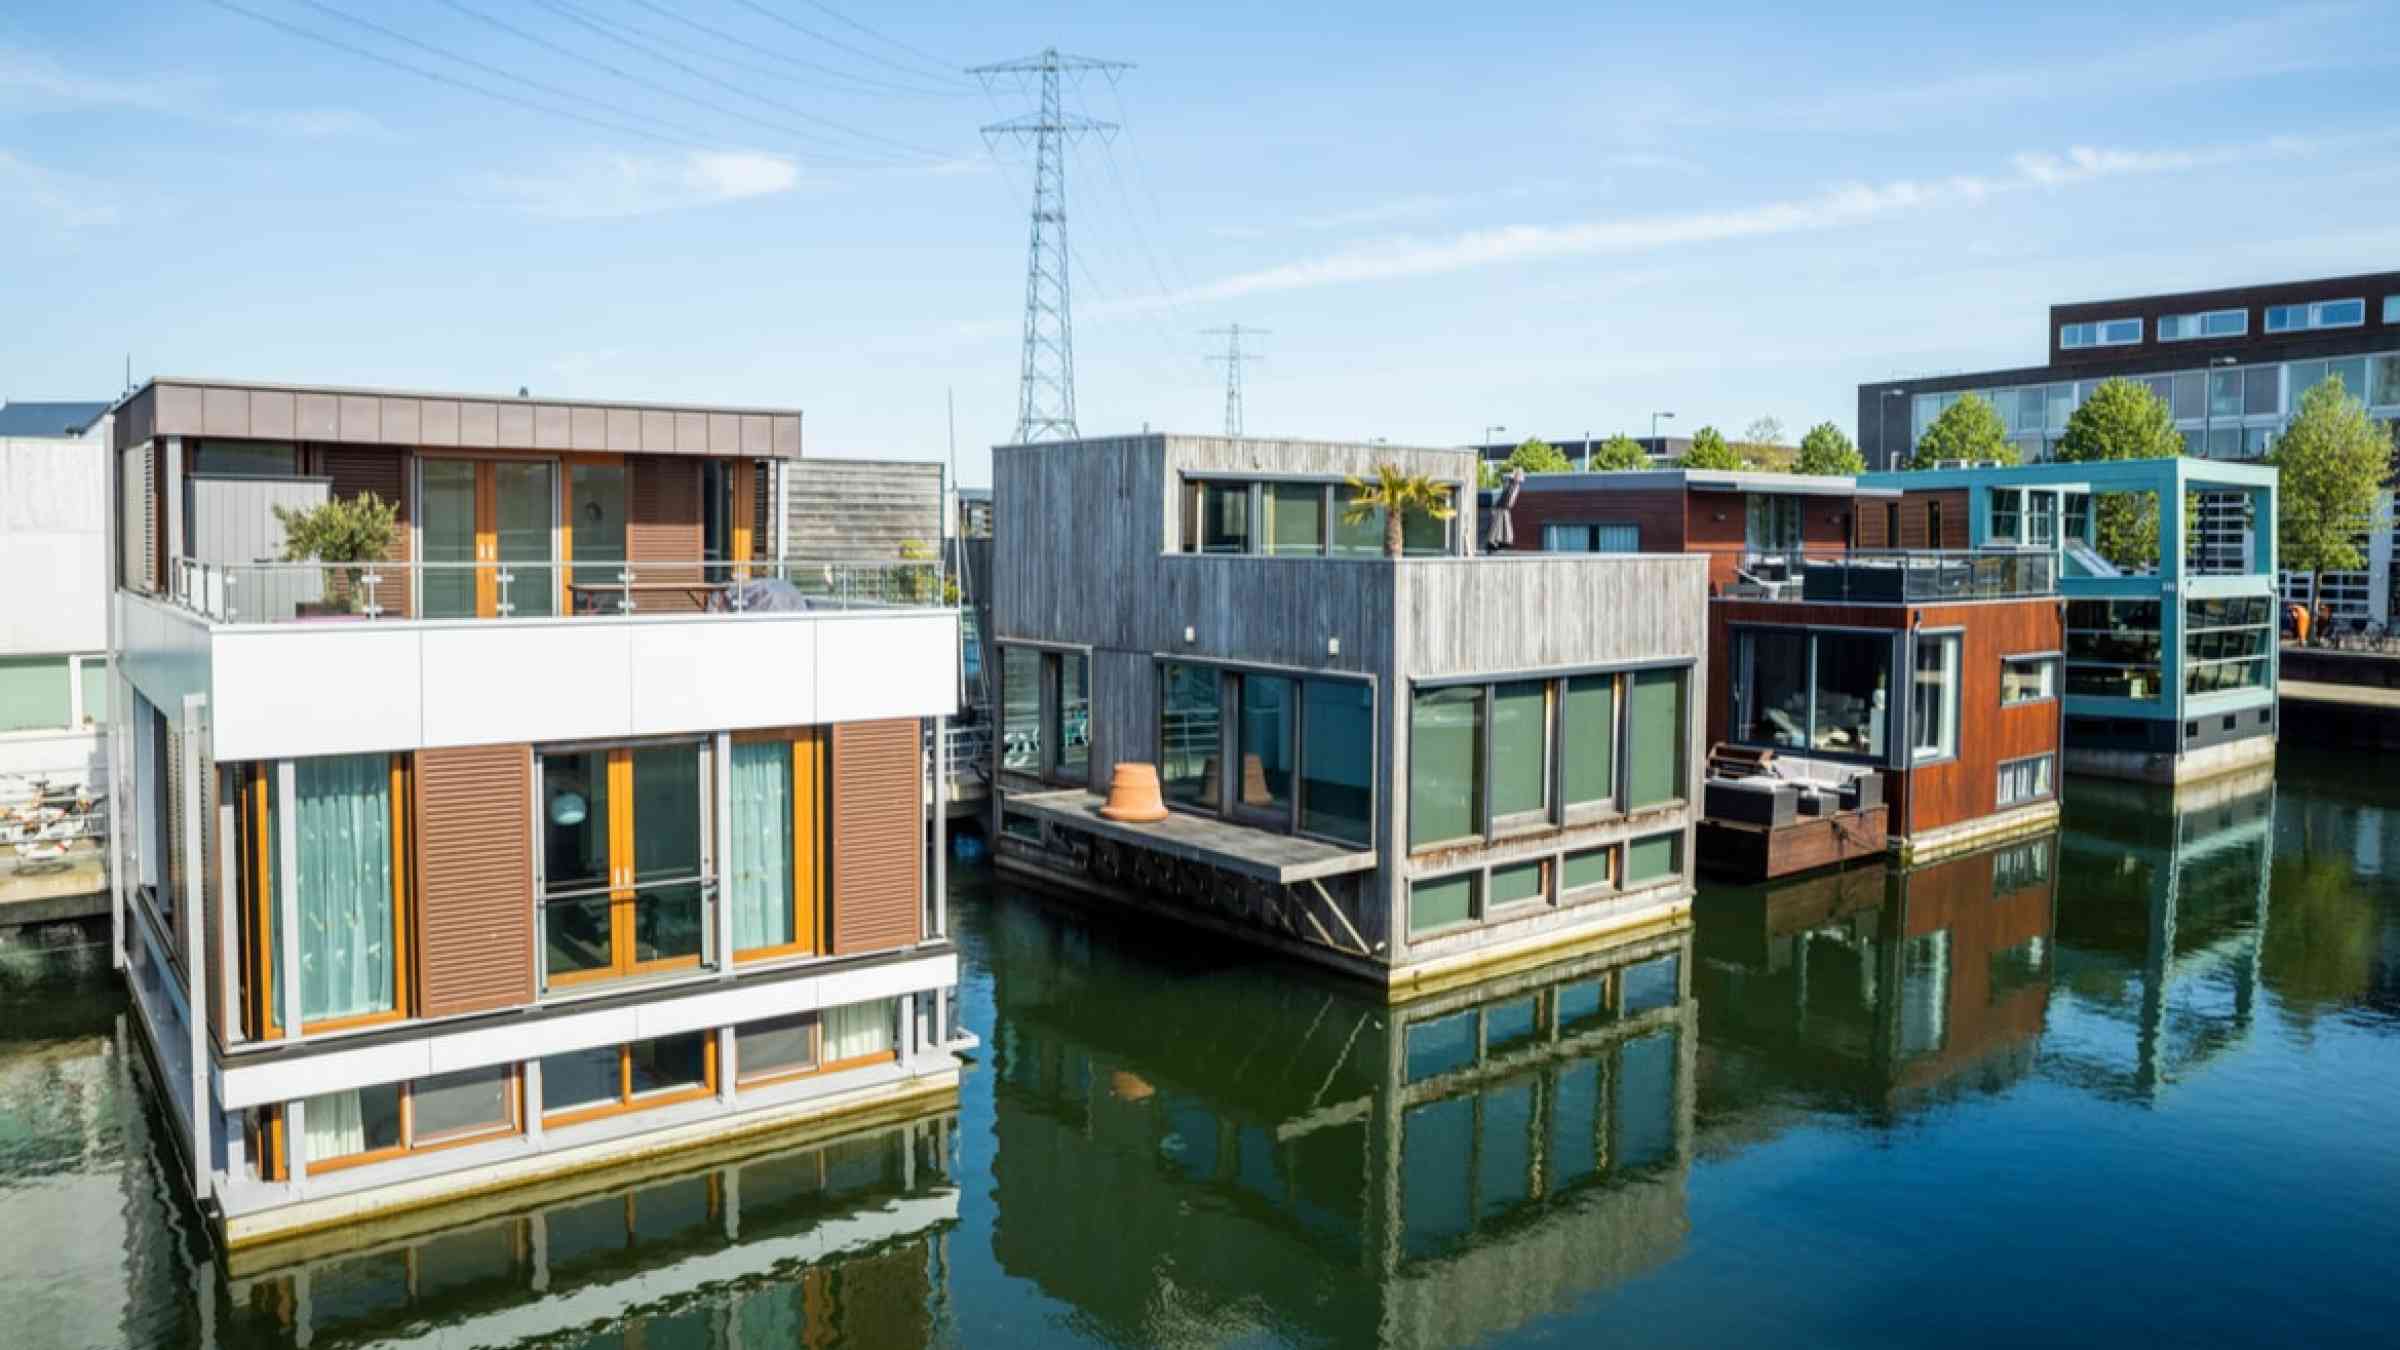 Floating houses in Amsterdam, The Netherlands